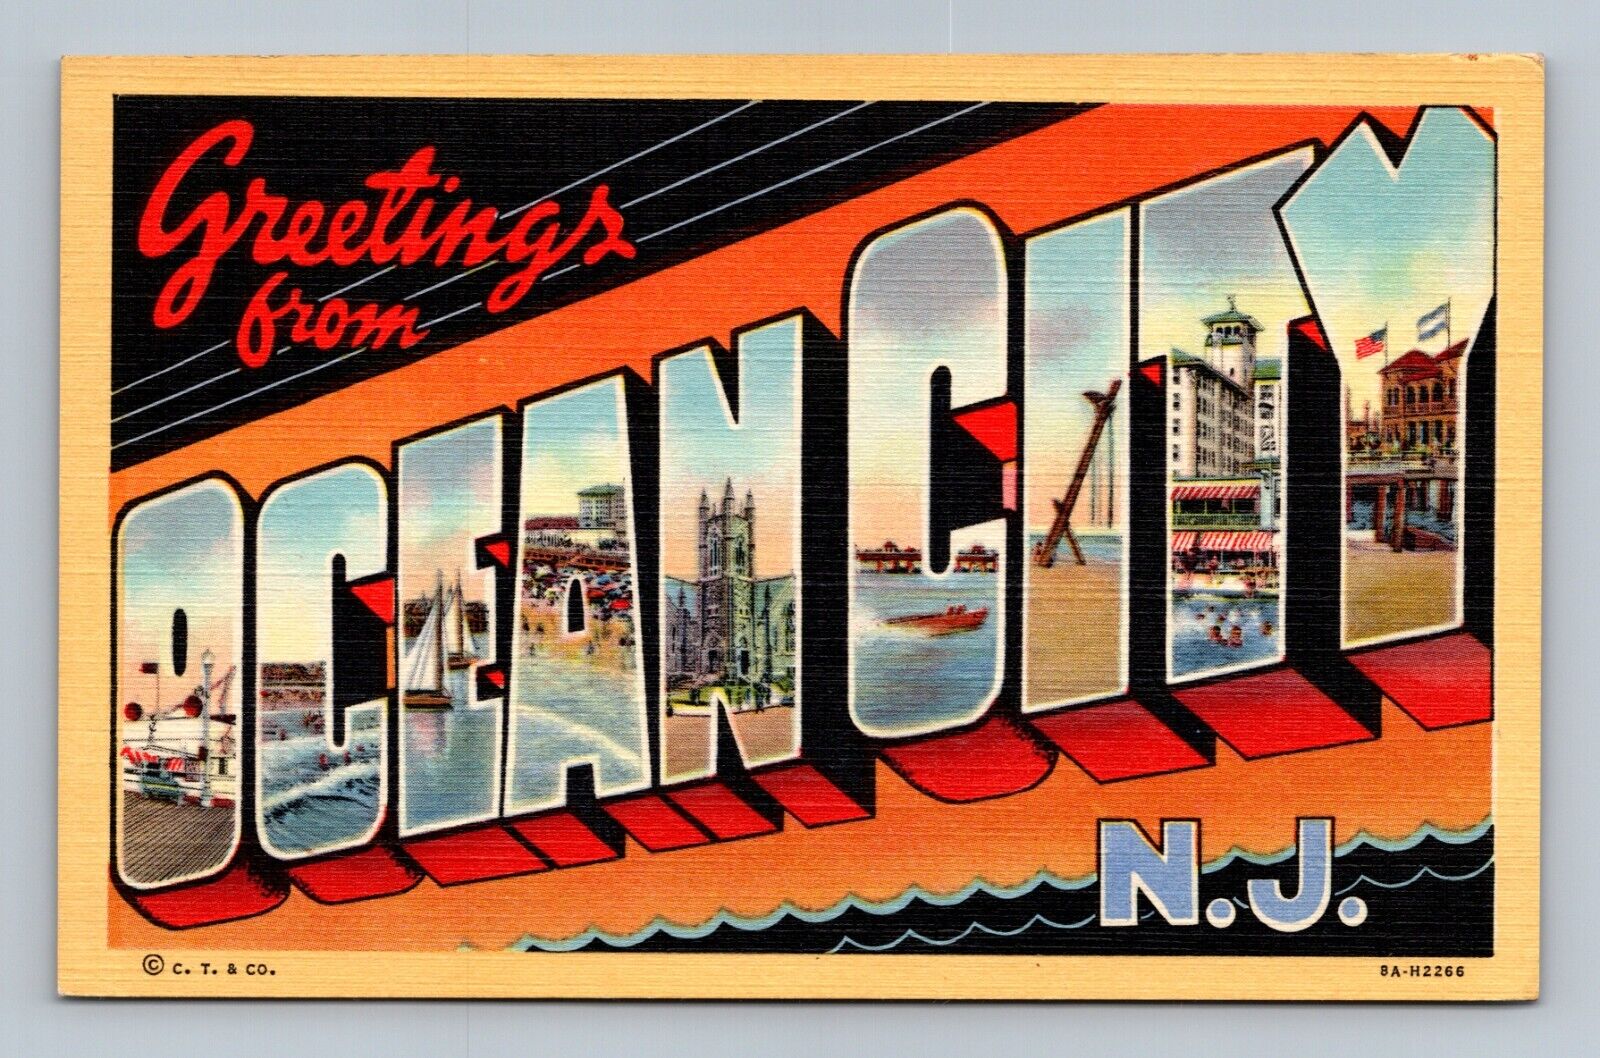 Greetings from Ocean City, NJ Cape Large Letter New Jersey